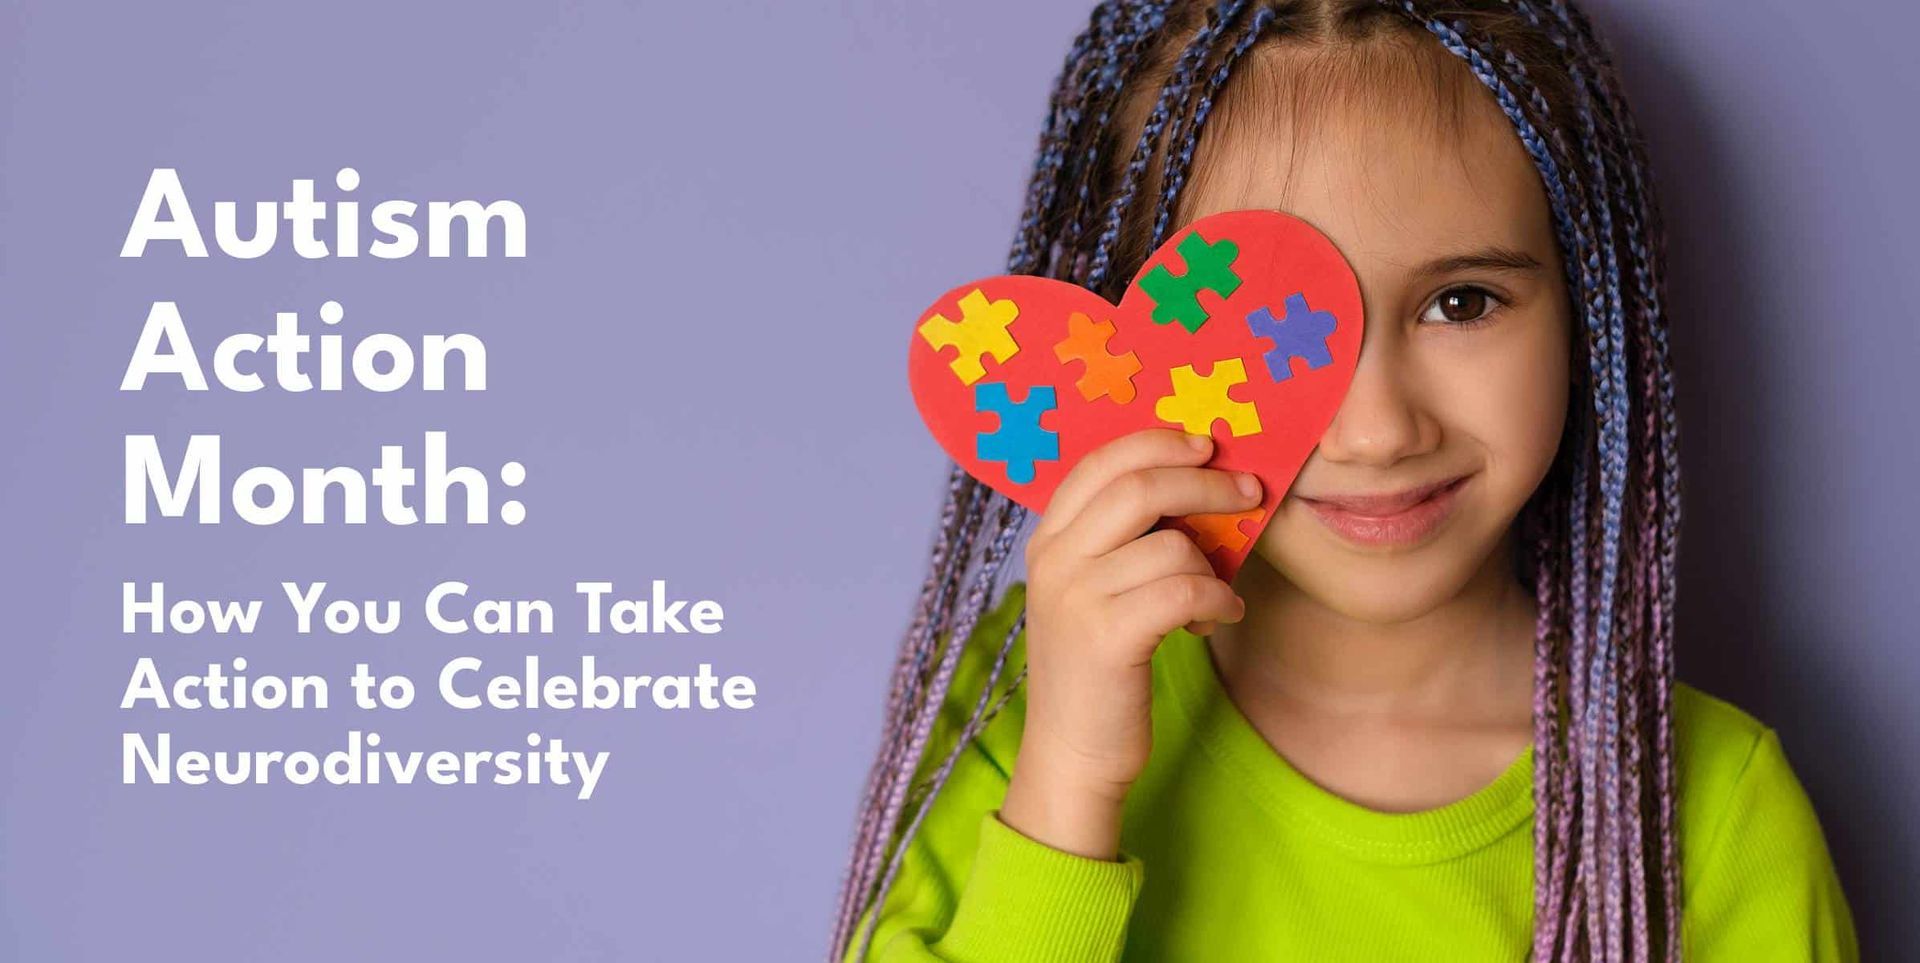 Autism Action (Awareness) Month: How to Celebrate Neurodiversity